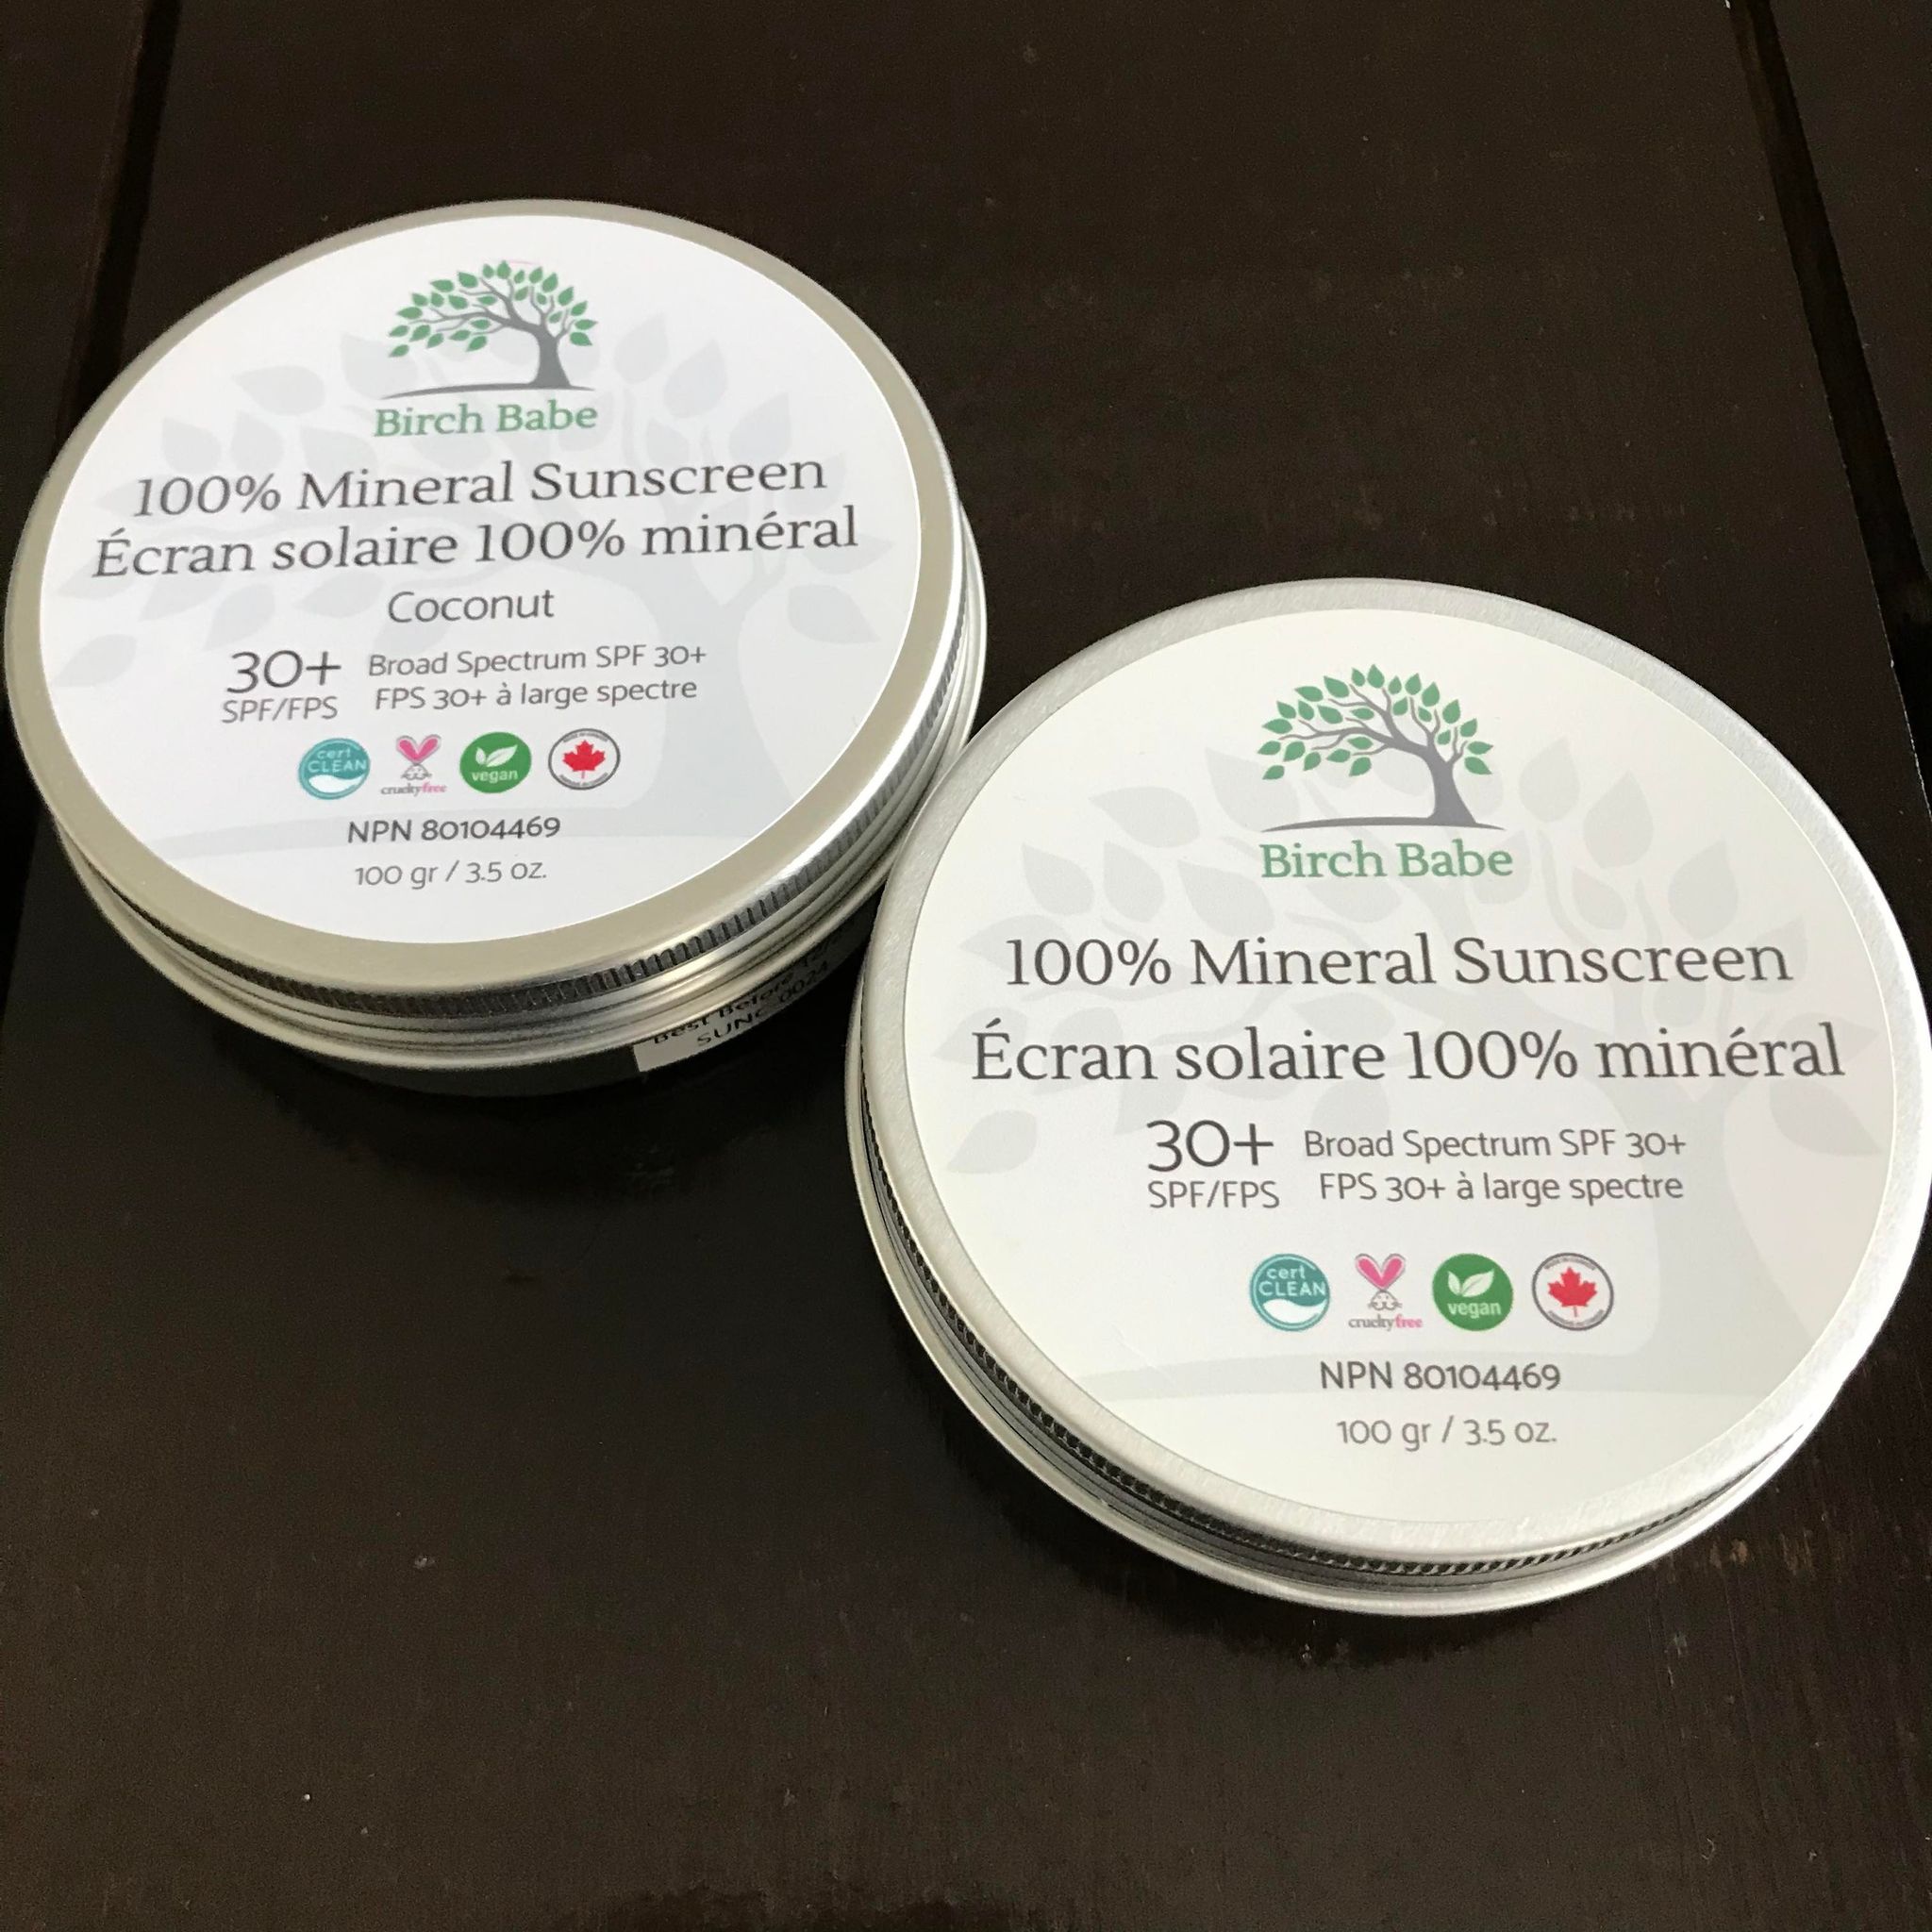 Natural mineral suncreen with a broad spectrum spf 30 plus in fragrance free or coconut